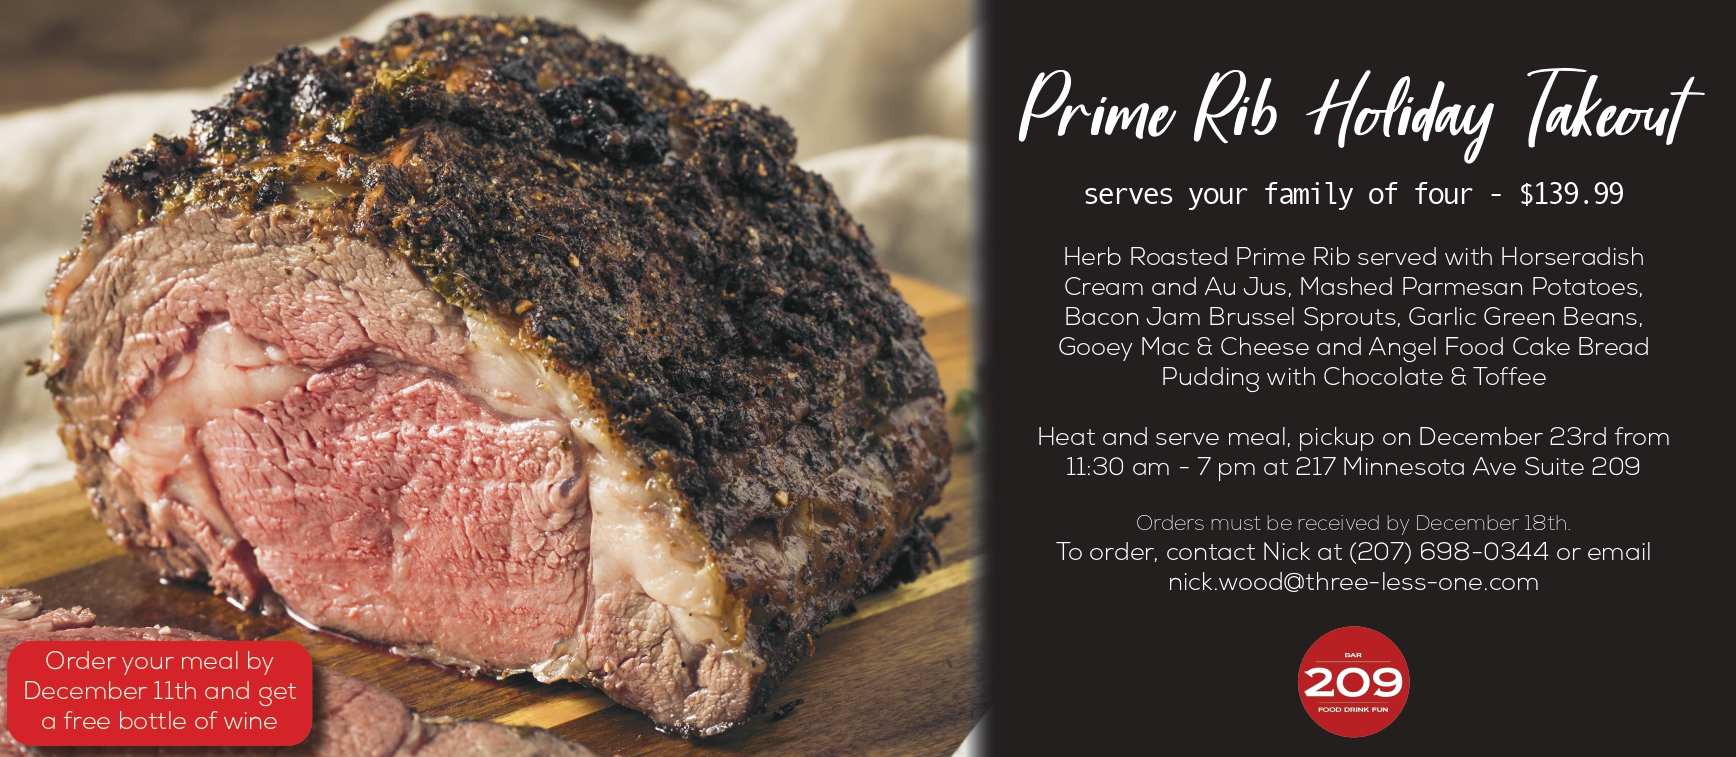 Prime Rib Ad Red (1)_page-0001